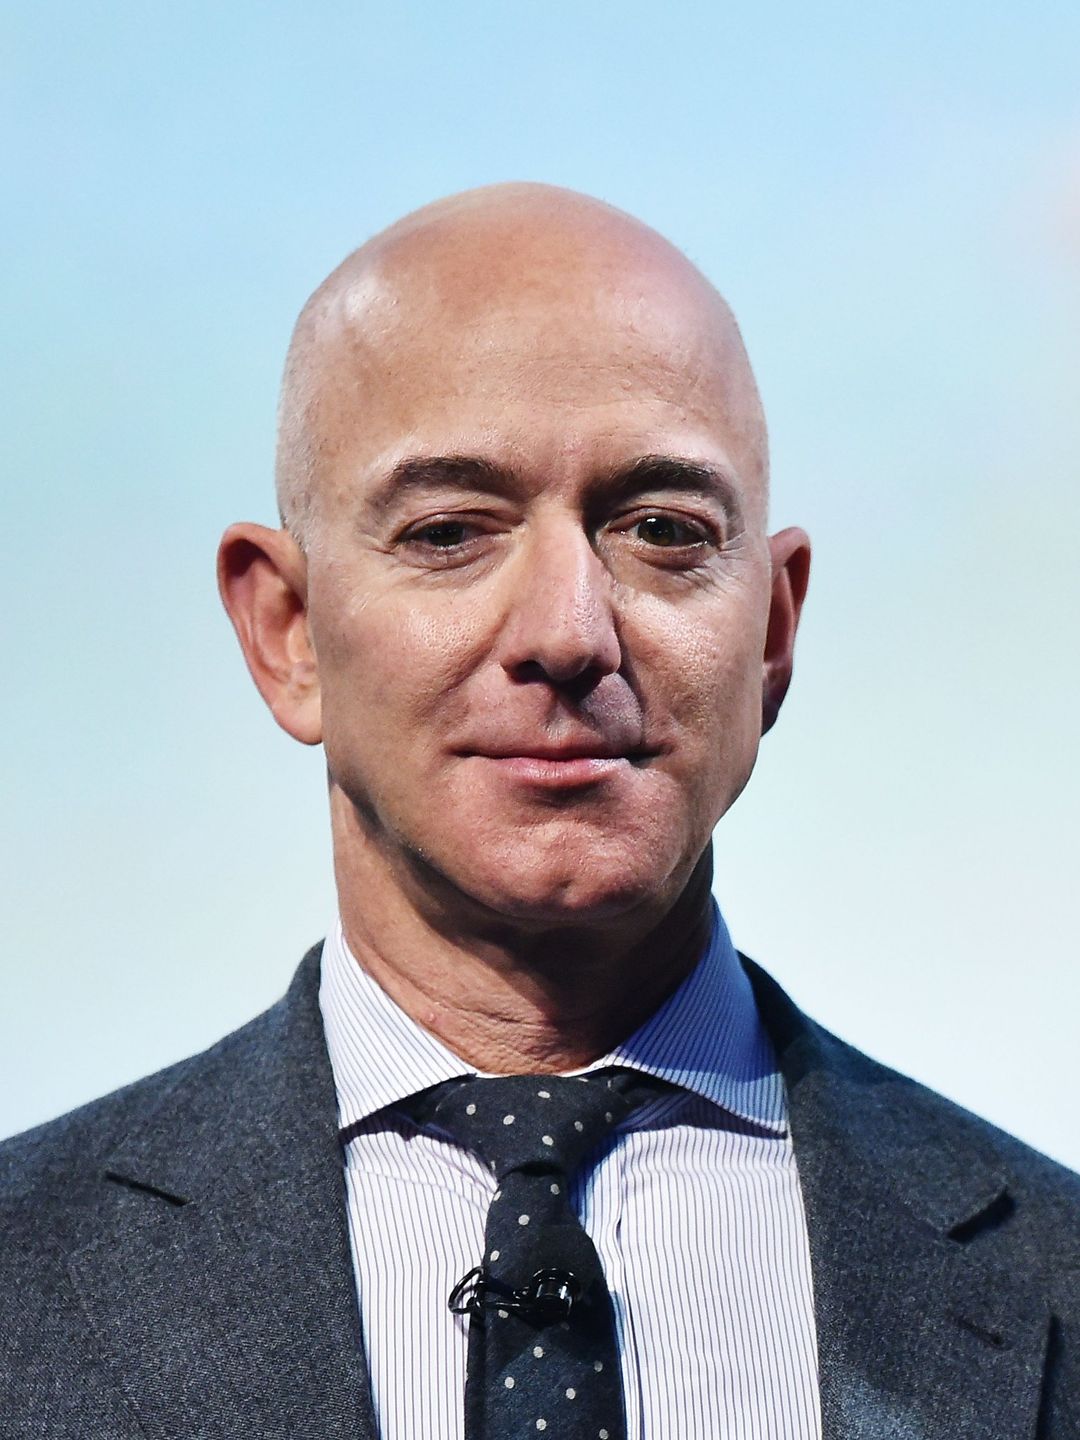 Jeff Bezos who is his father